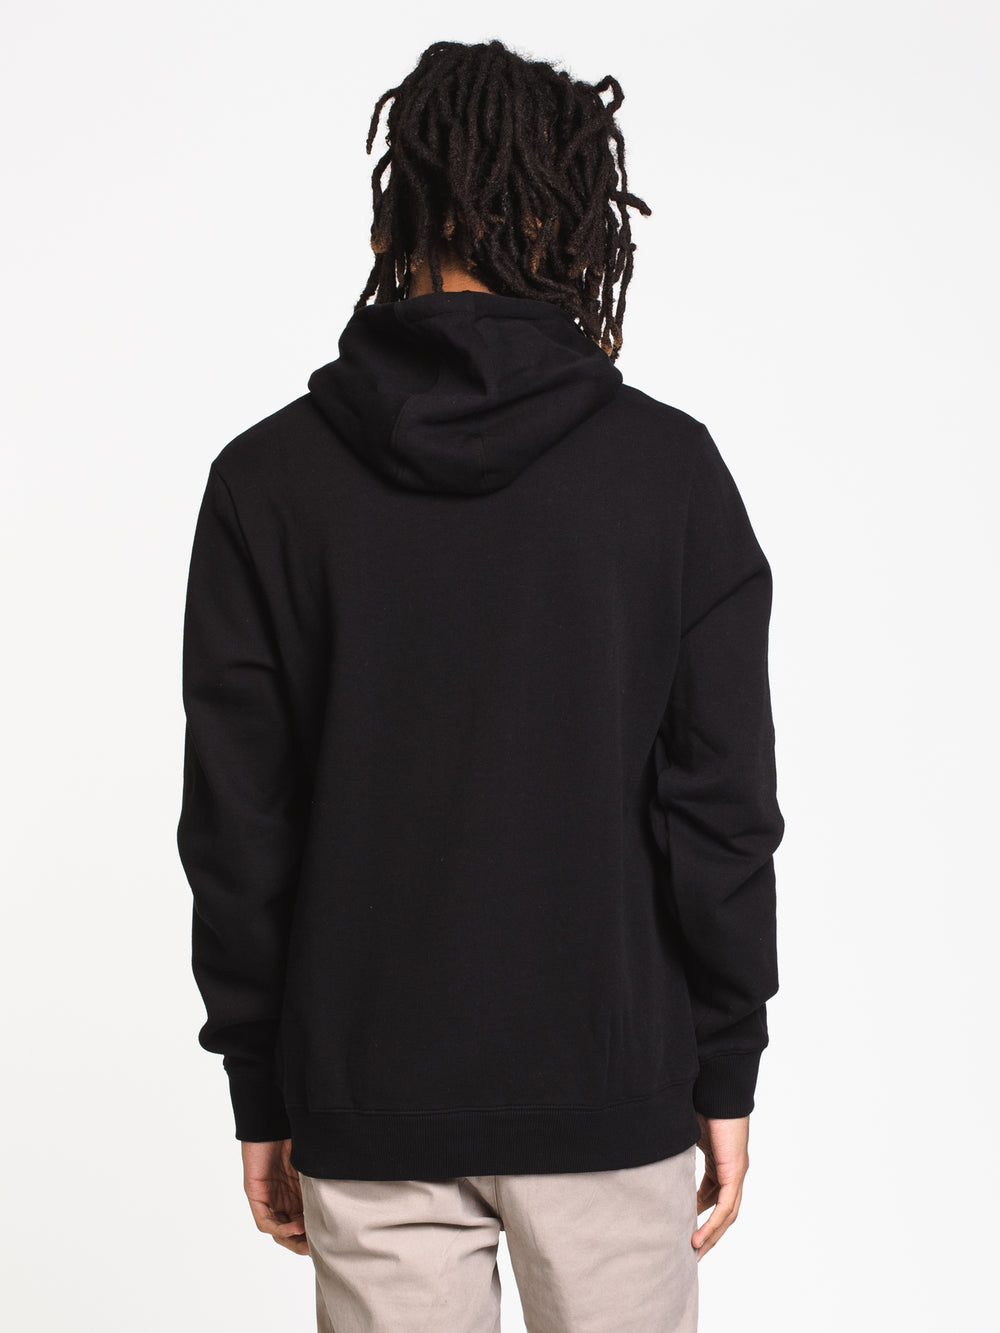 GUESS ECO ROY TRIANGLE LOGO PULLOVER HOODIE  - CLEARANCE